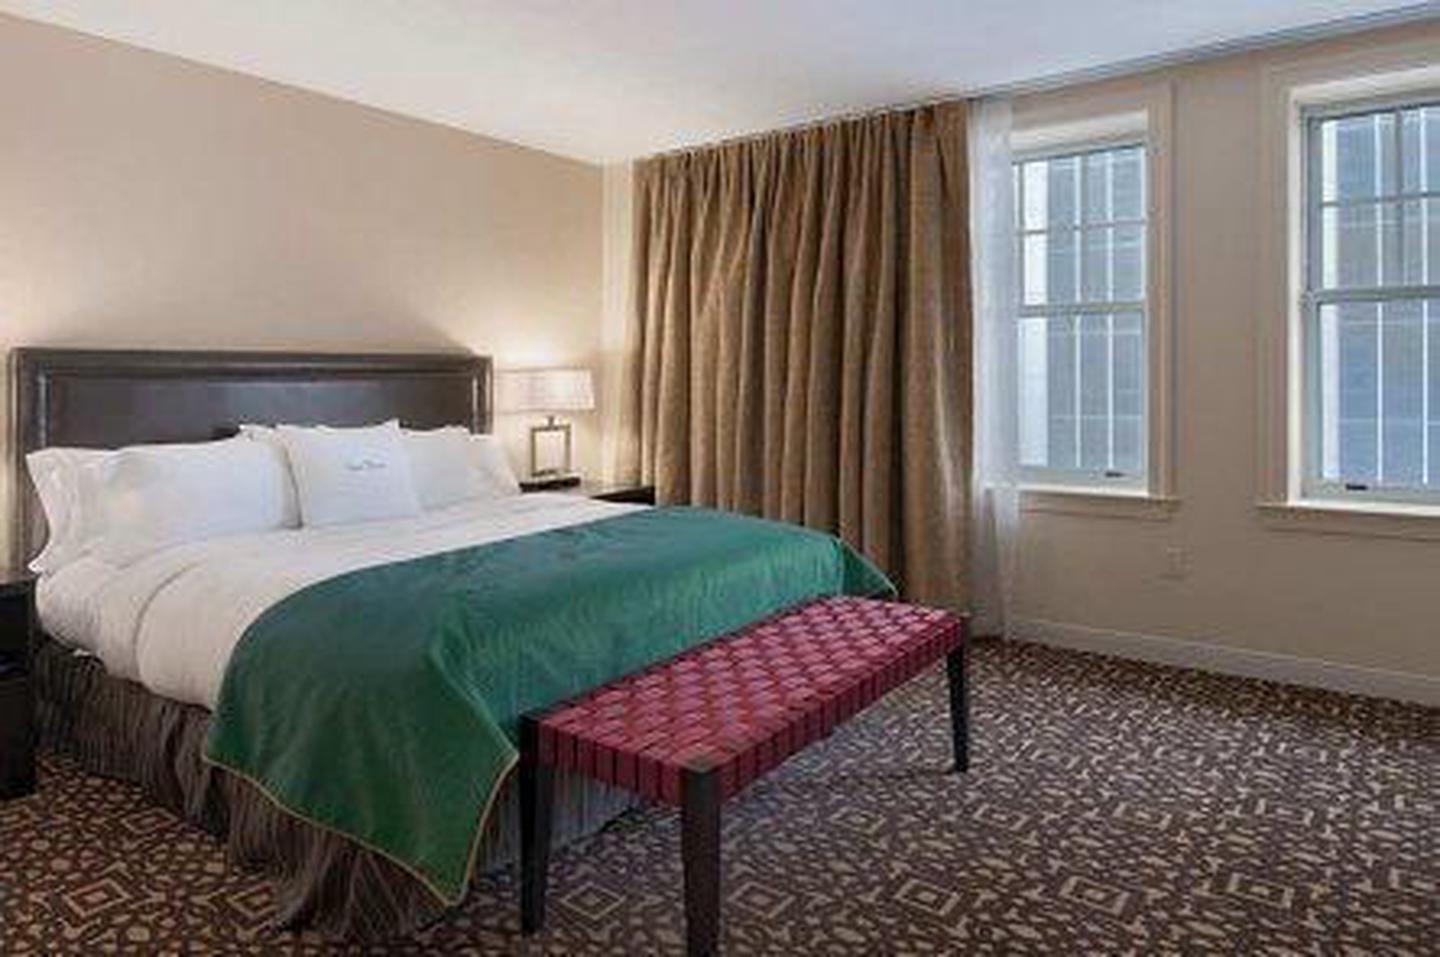 Rest and Relax Relax from a busy day exploring the city of Detroit with a luxurious guestroom.